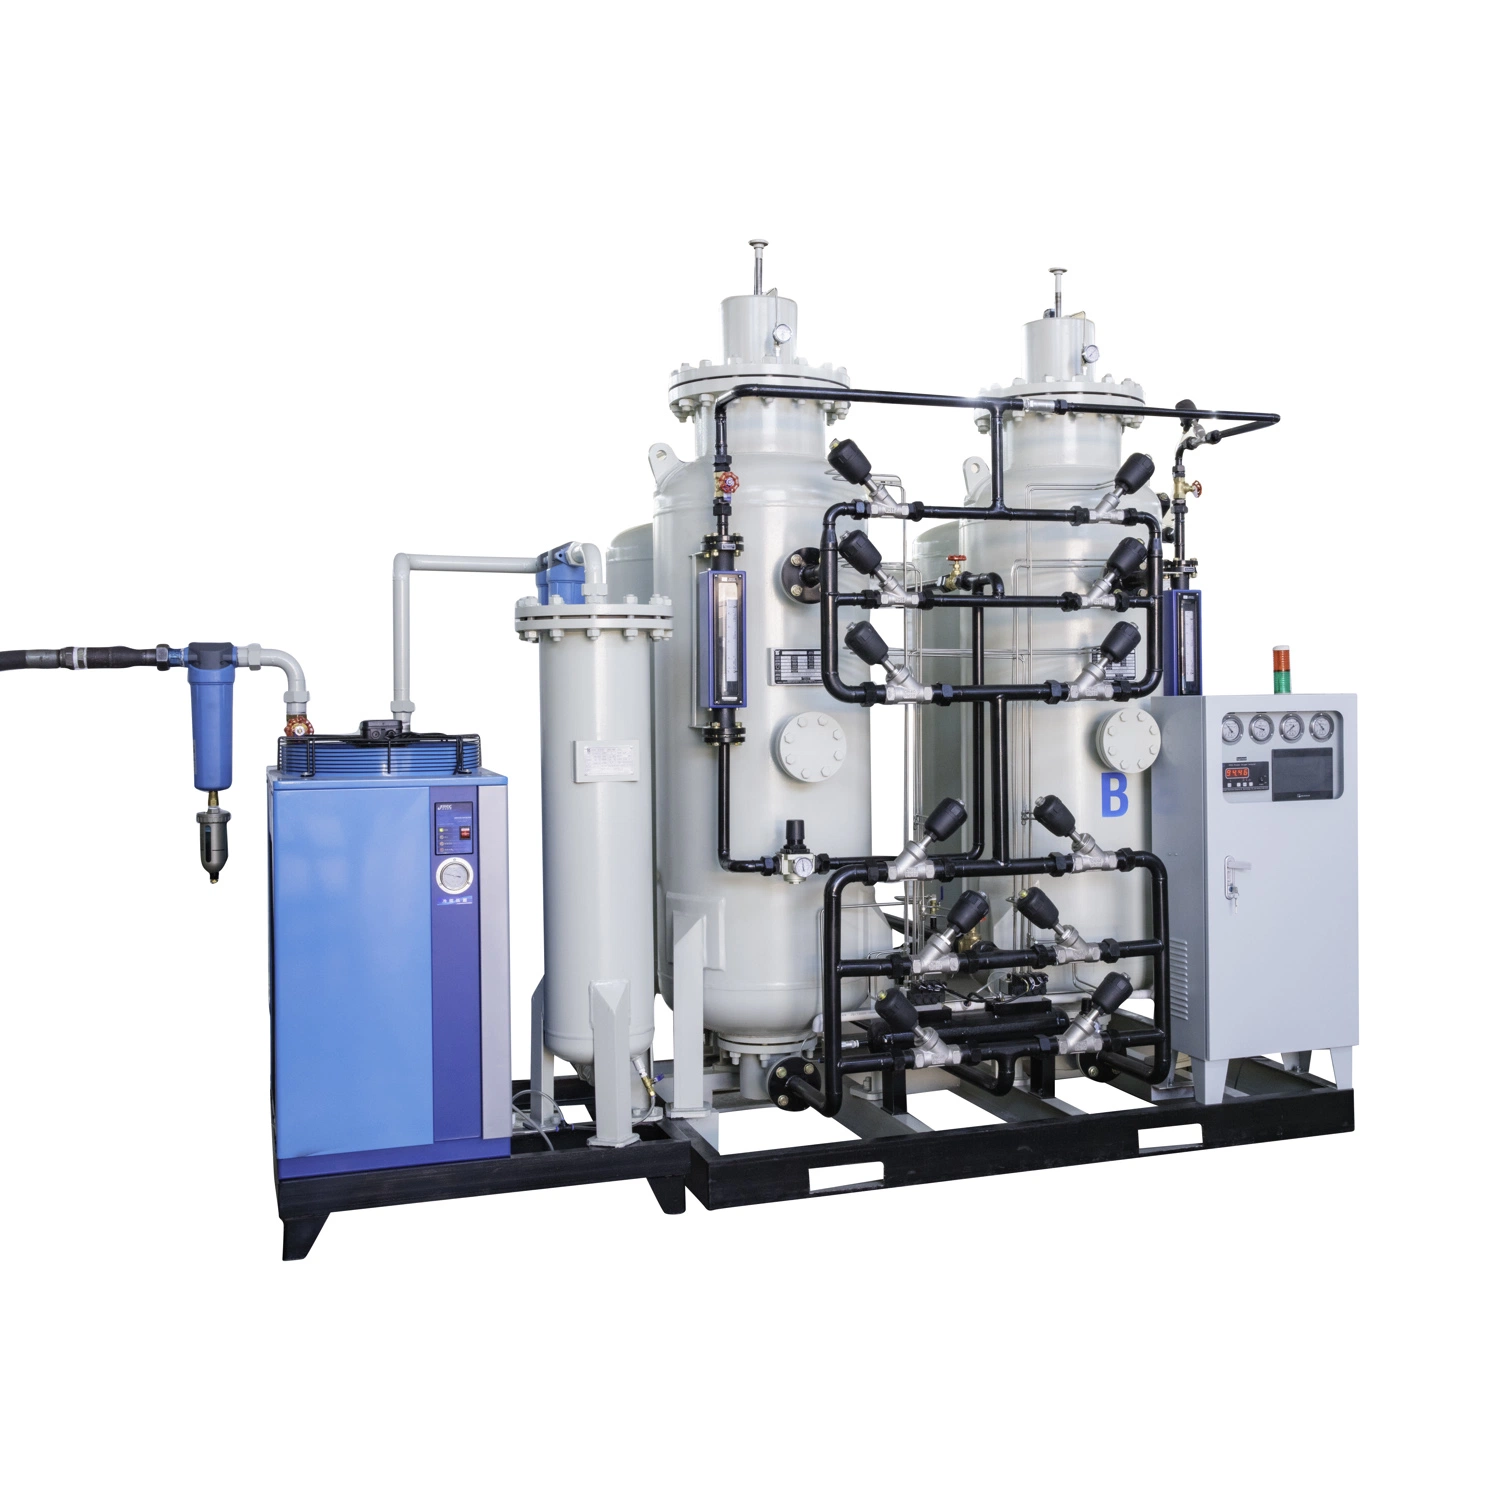 Molecular Sieve Physical Oxygen Production High-Purity Oxygen Generator System